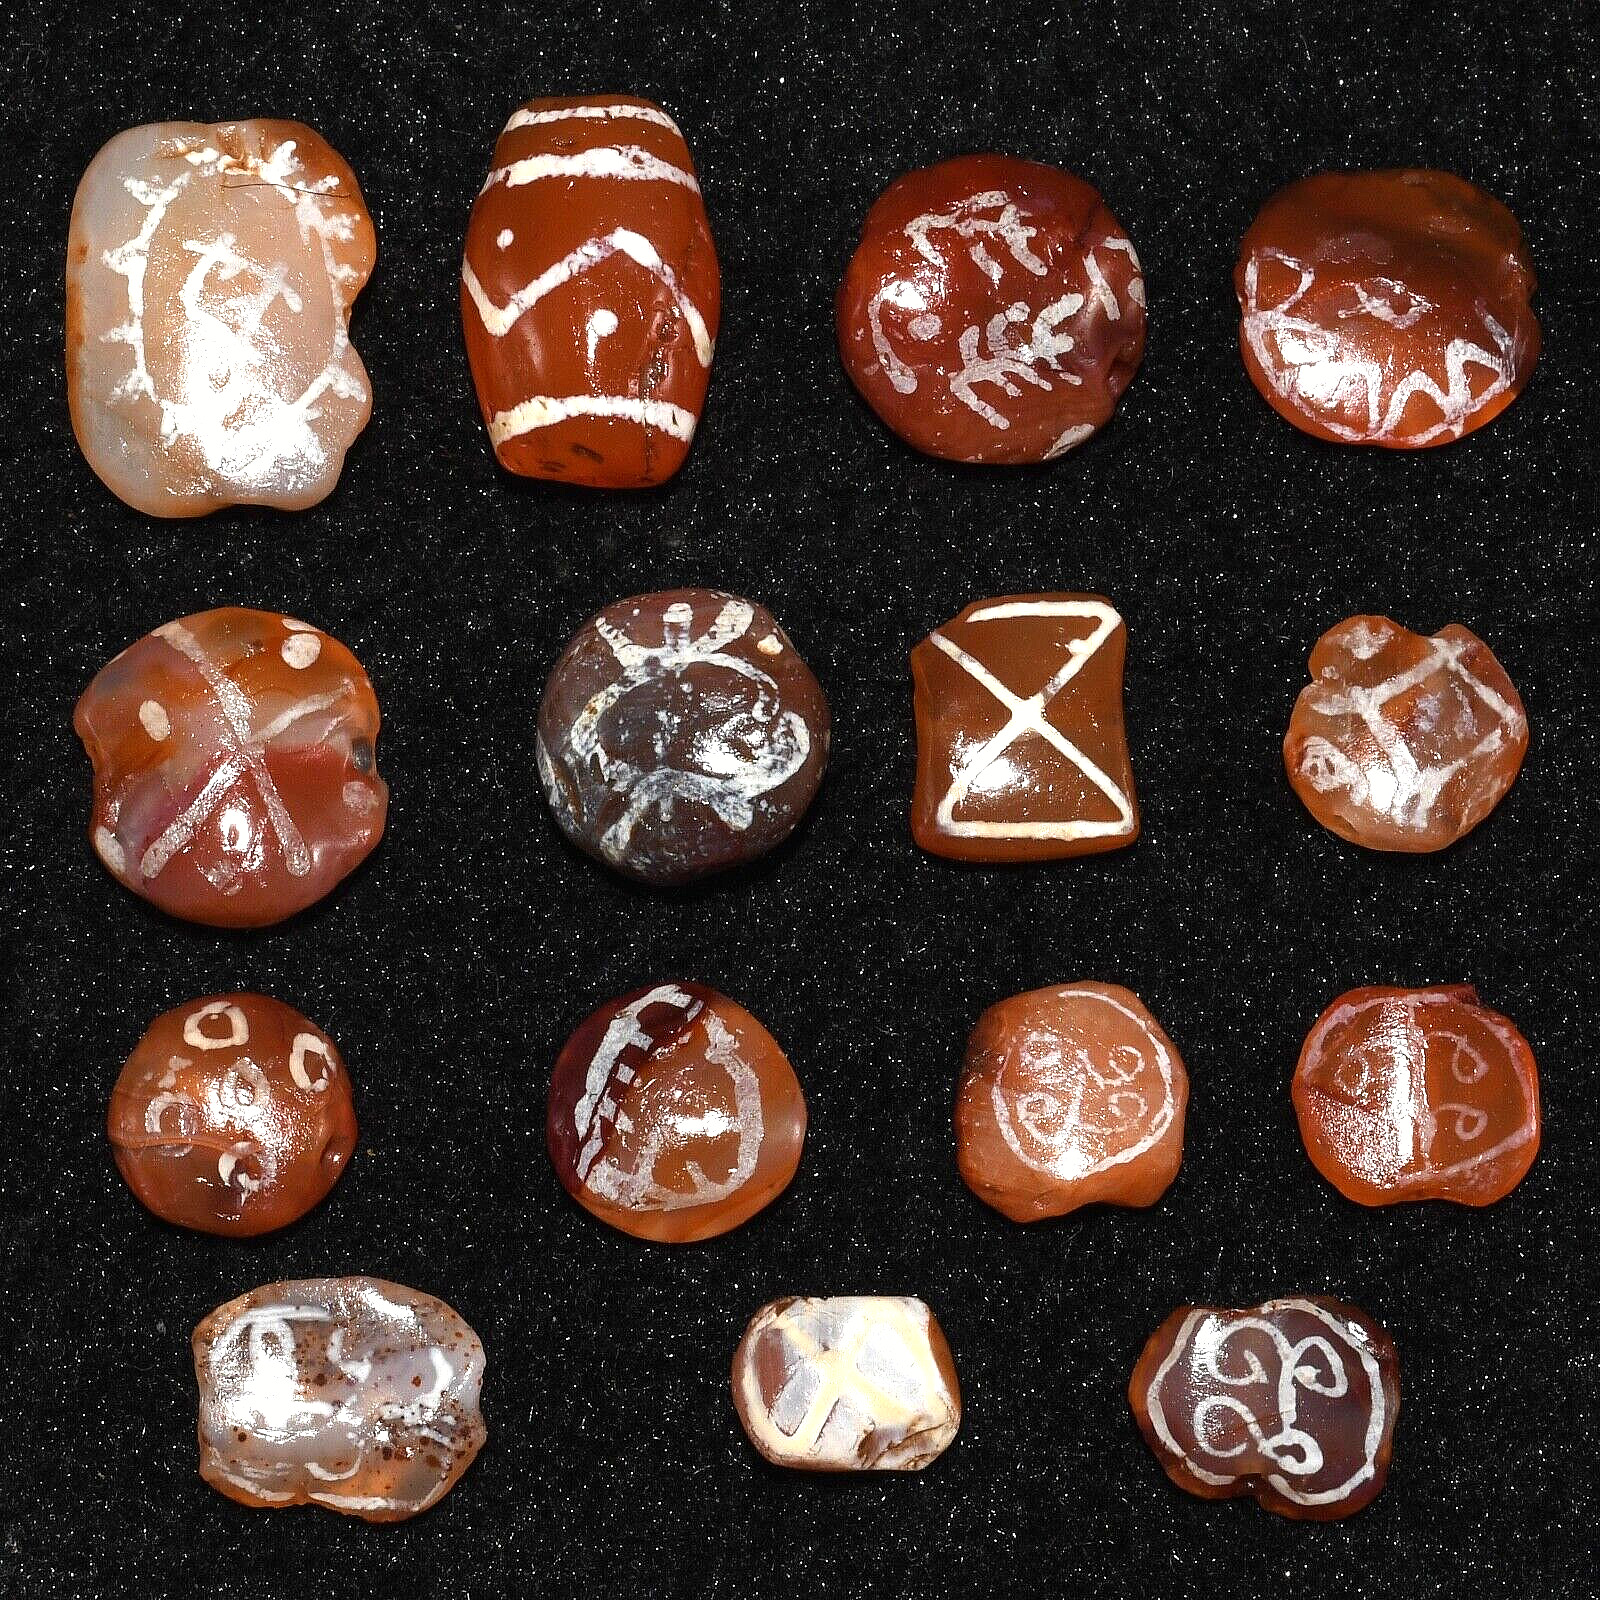 15 Large Ancient Central Asian Etched Carnelian Beads over 2000 Years Old